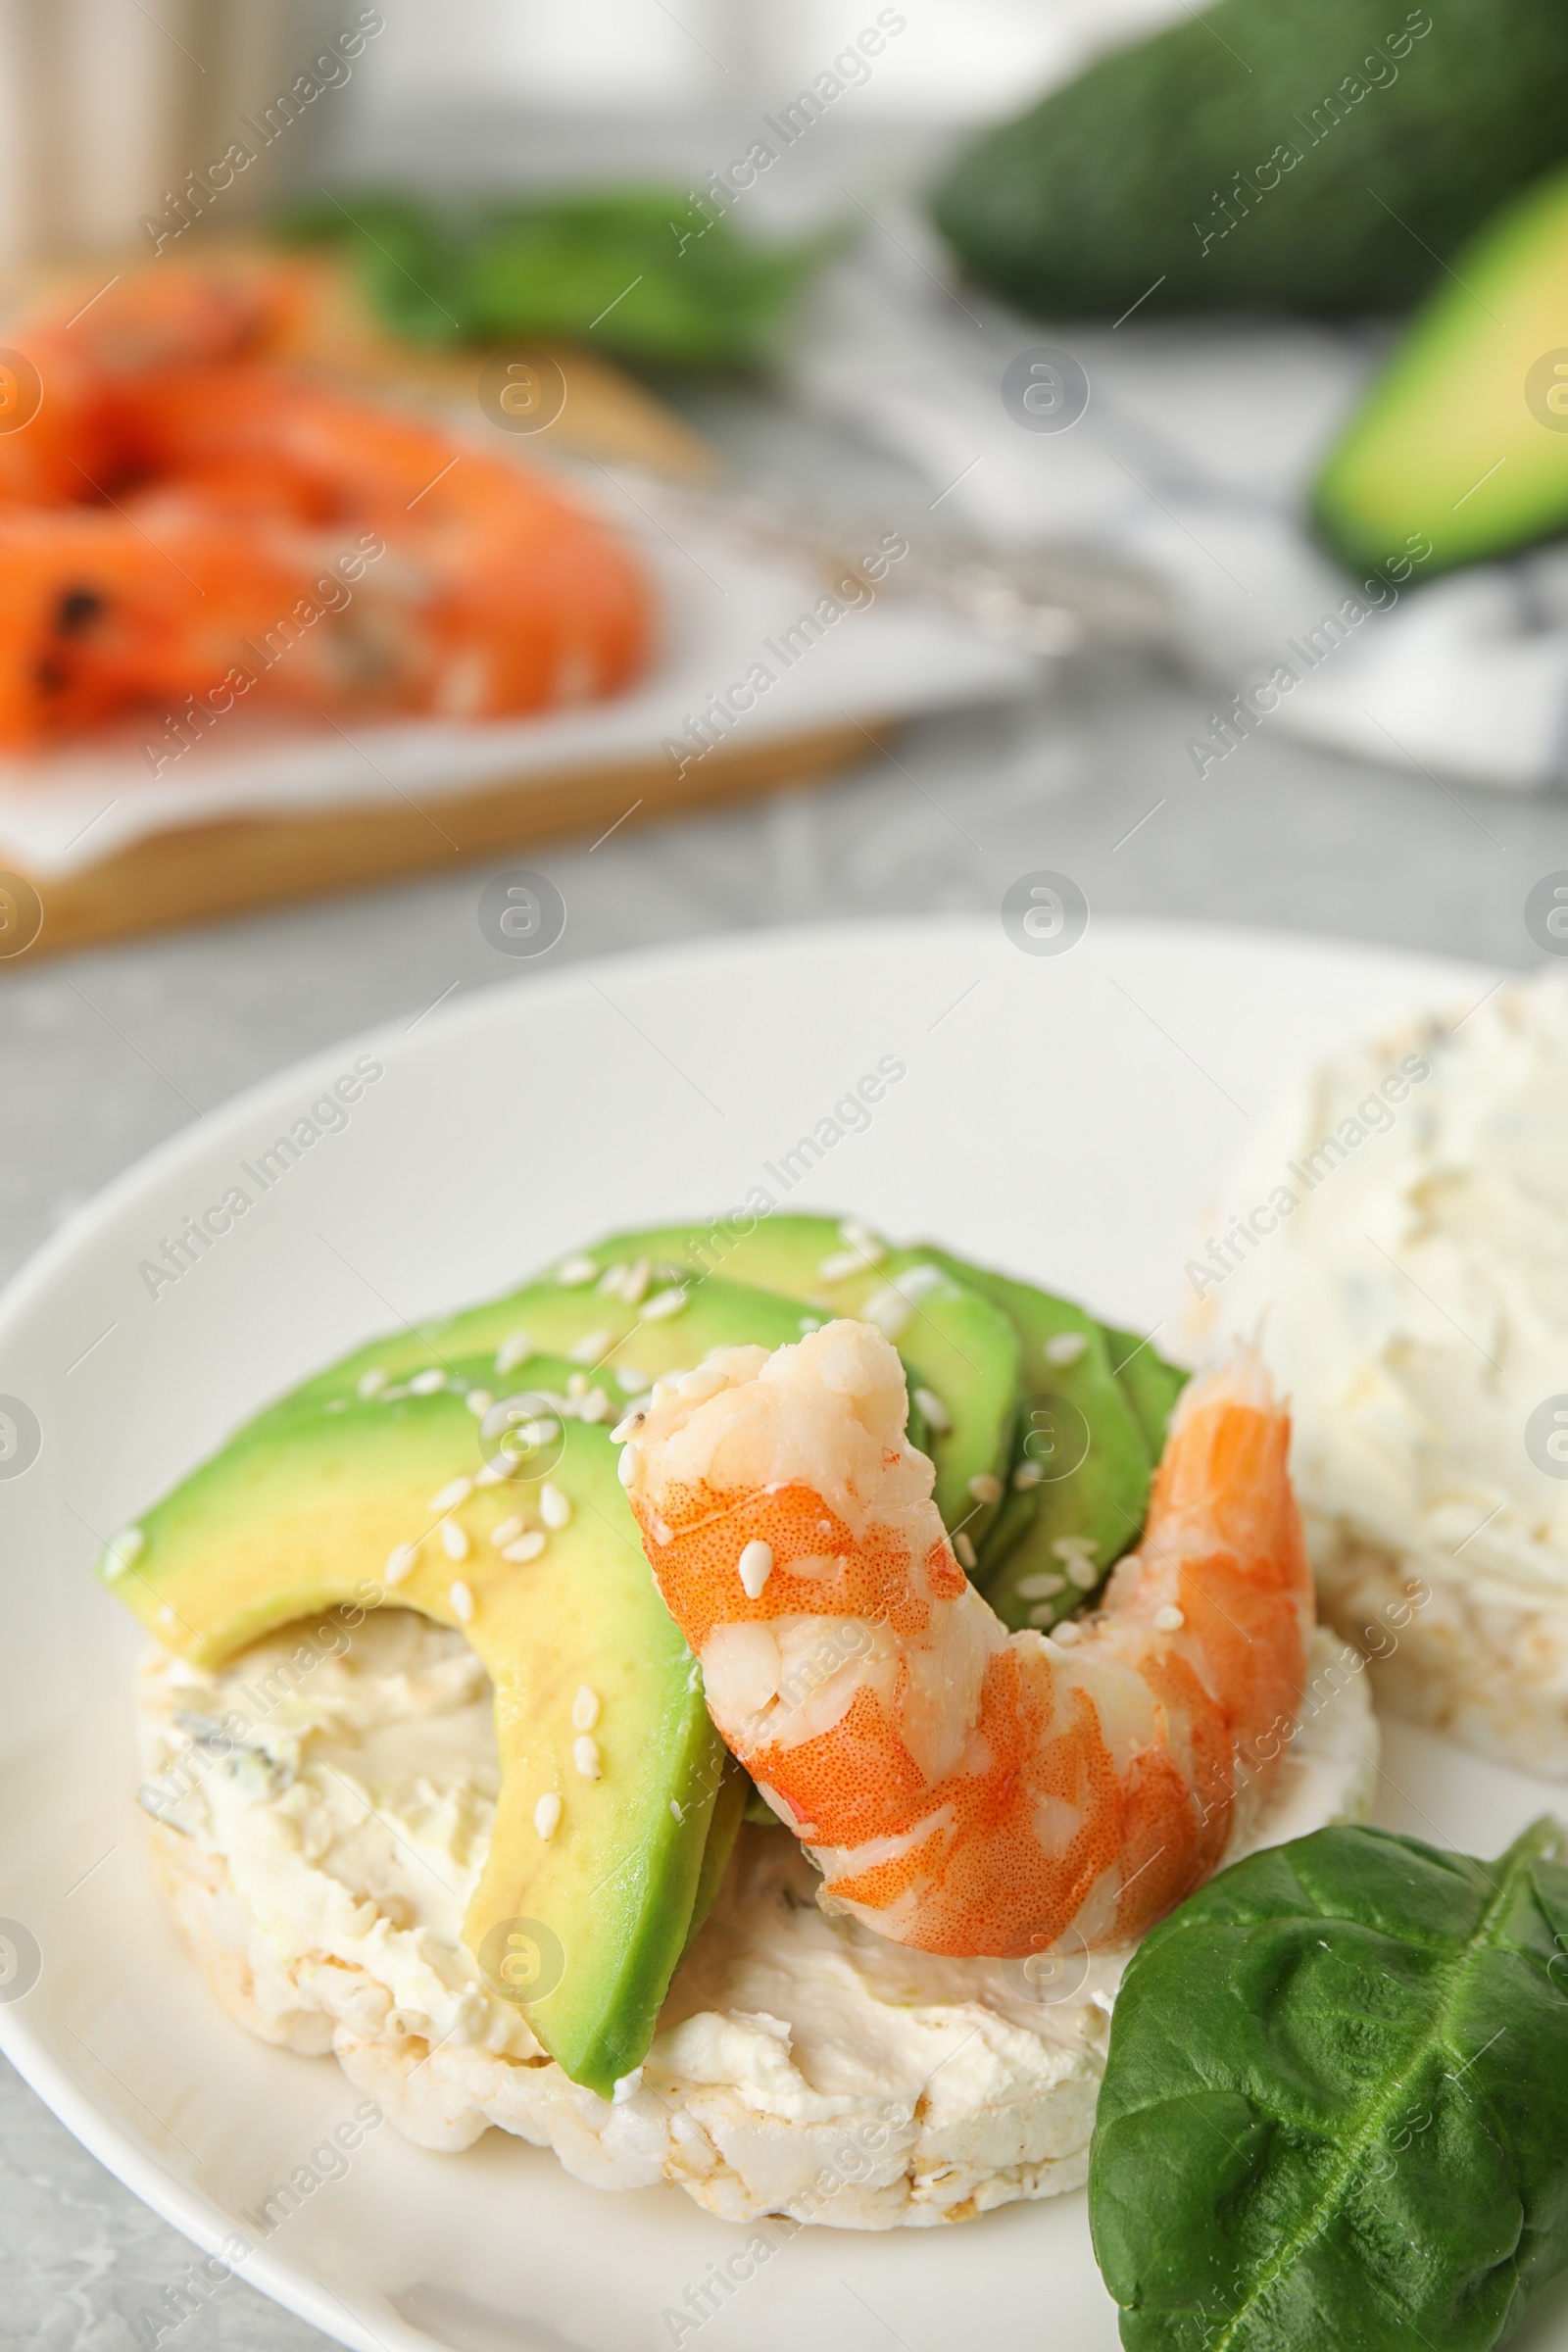 Photo of Puffed rice cake with shrimp and avocado served on table